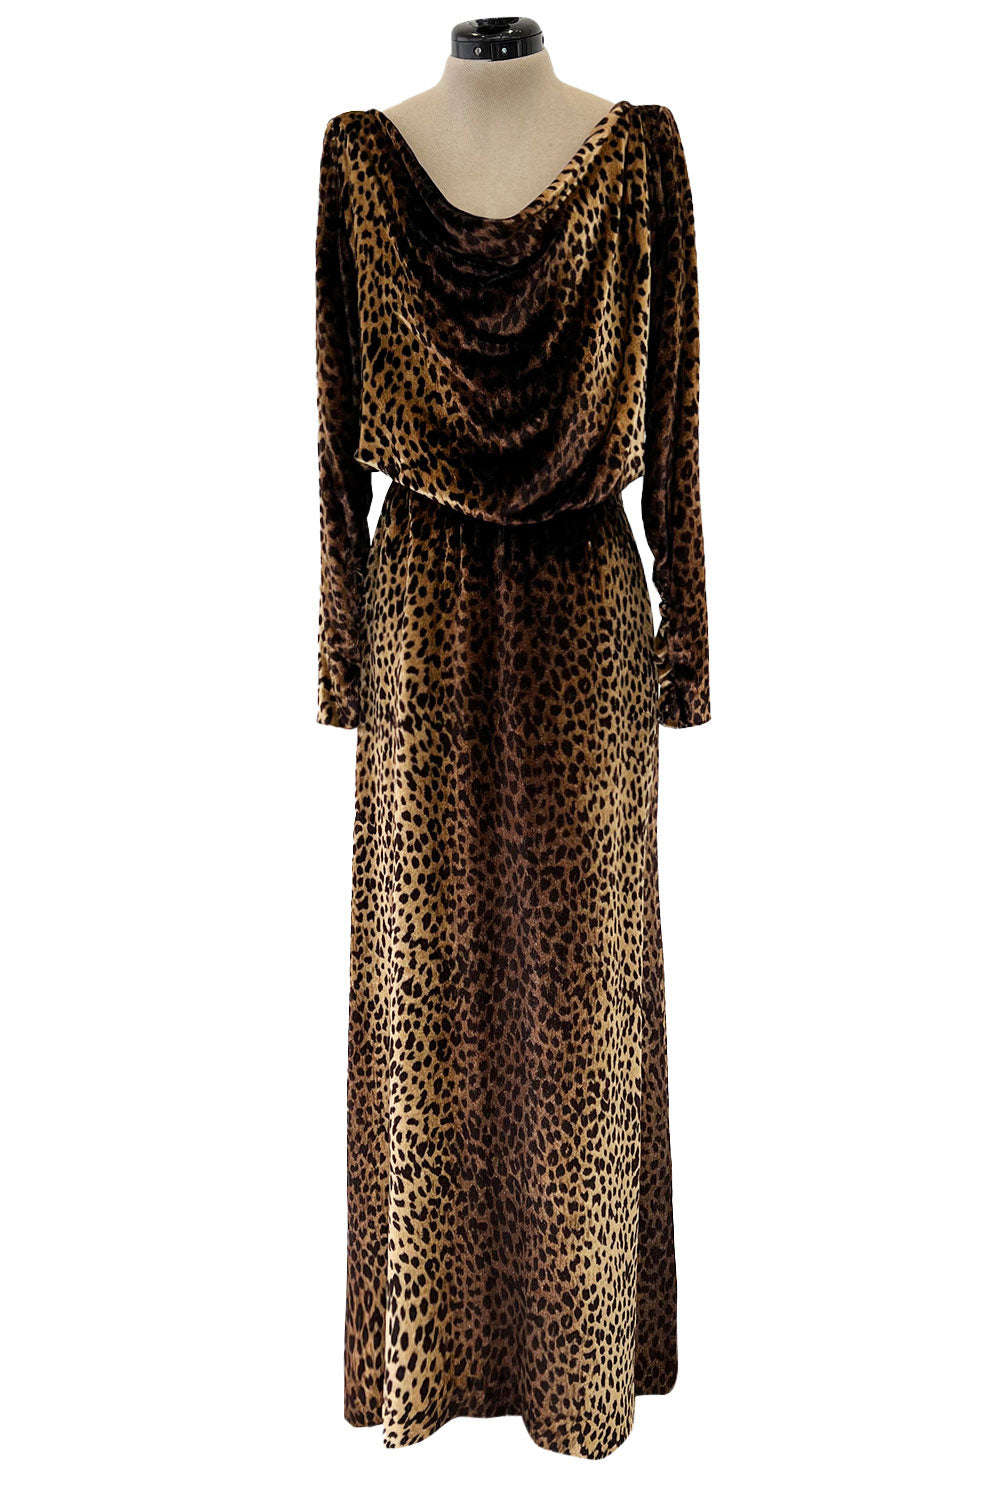 Fall 1999 Chanel Black and Cream Felted Wool Maxi Dress